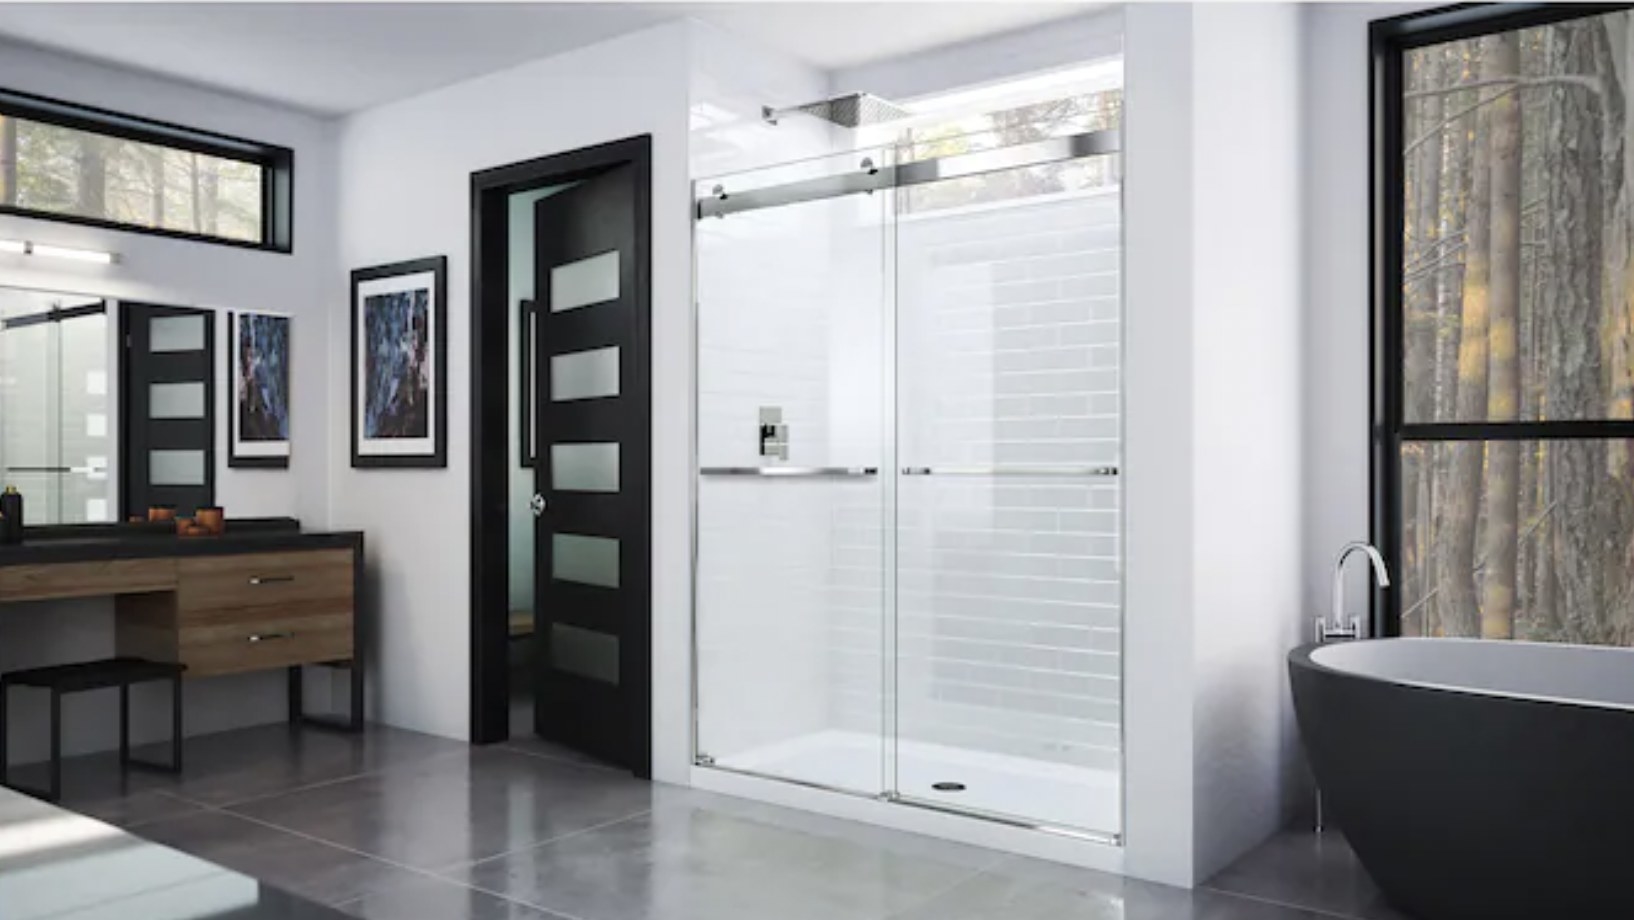 The glass shower door in silver finish